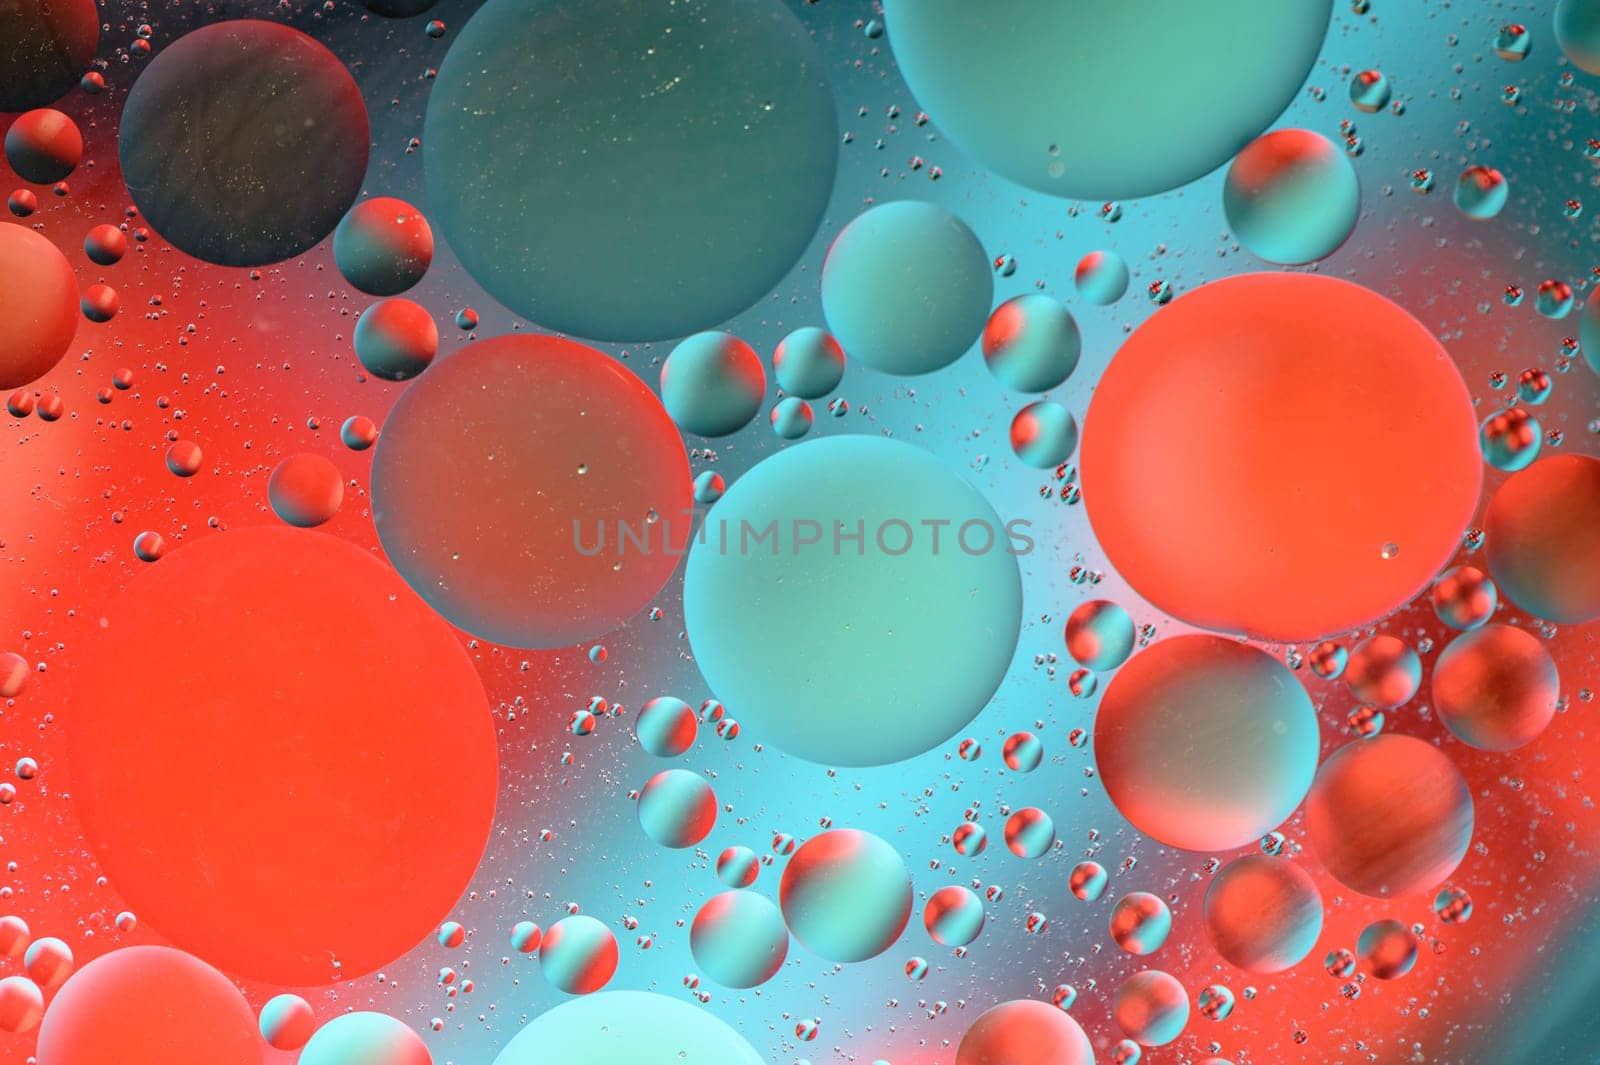 abstract background of multi-colored spots and circles microcosm universe galaxy 8 by Mixa74